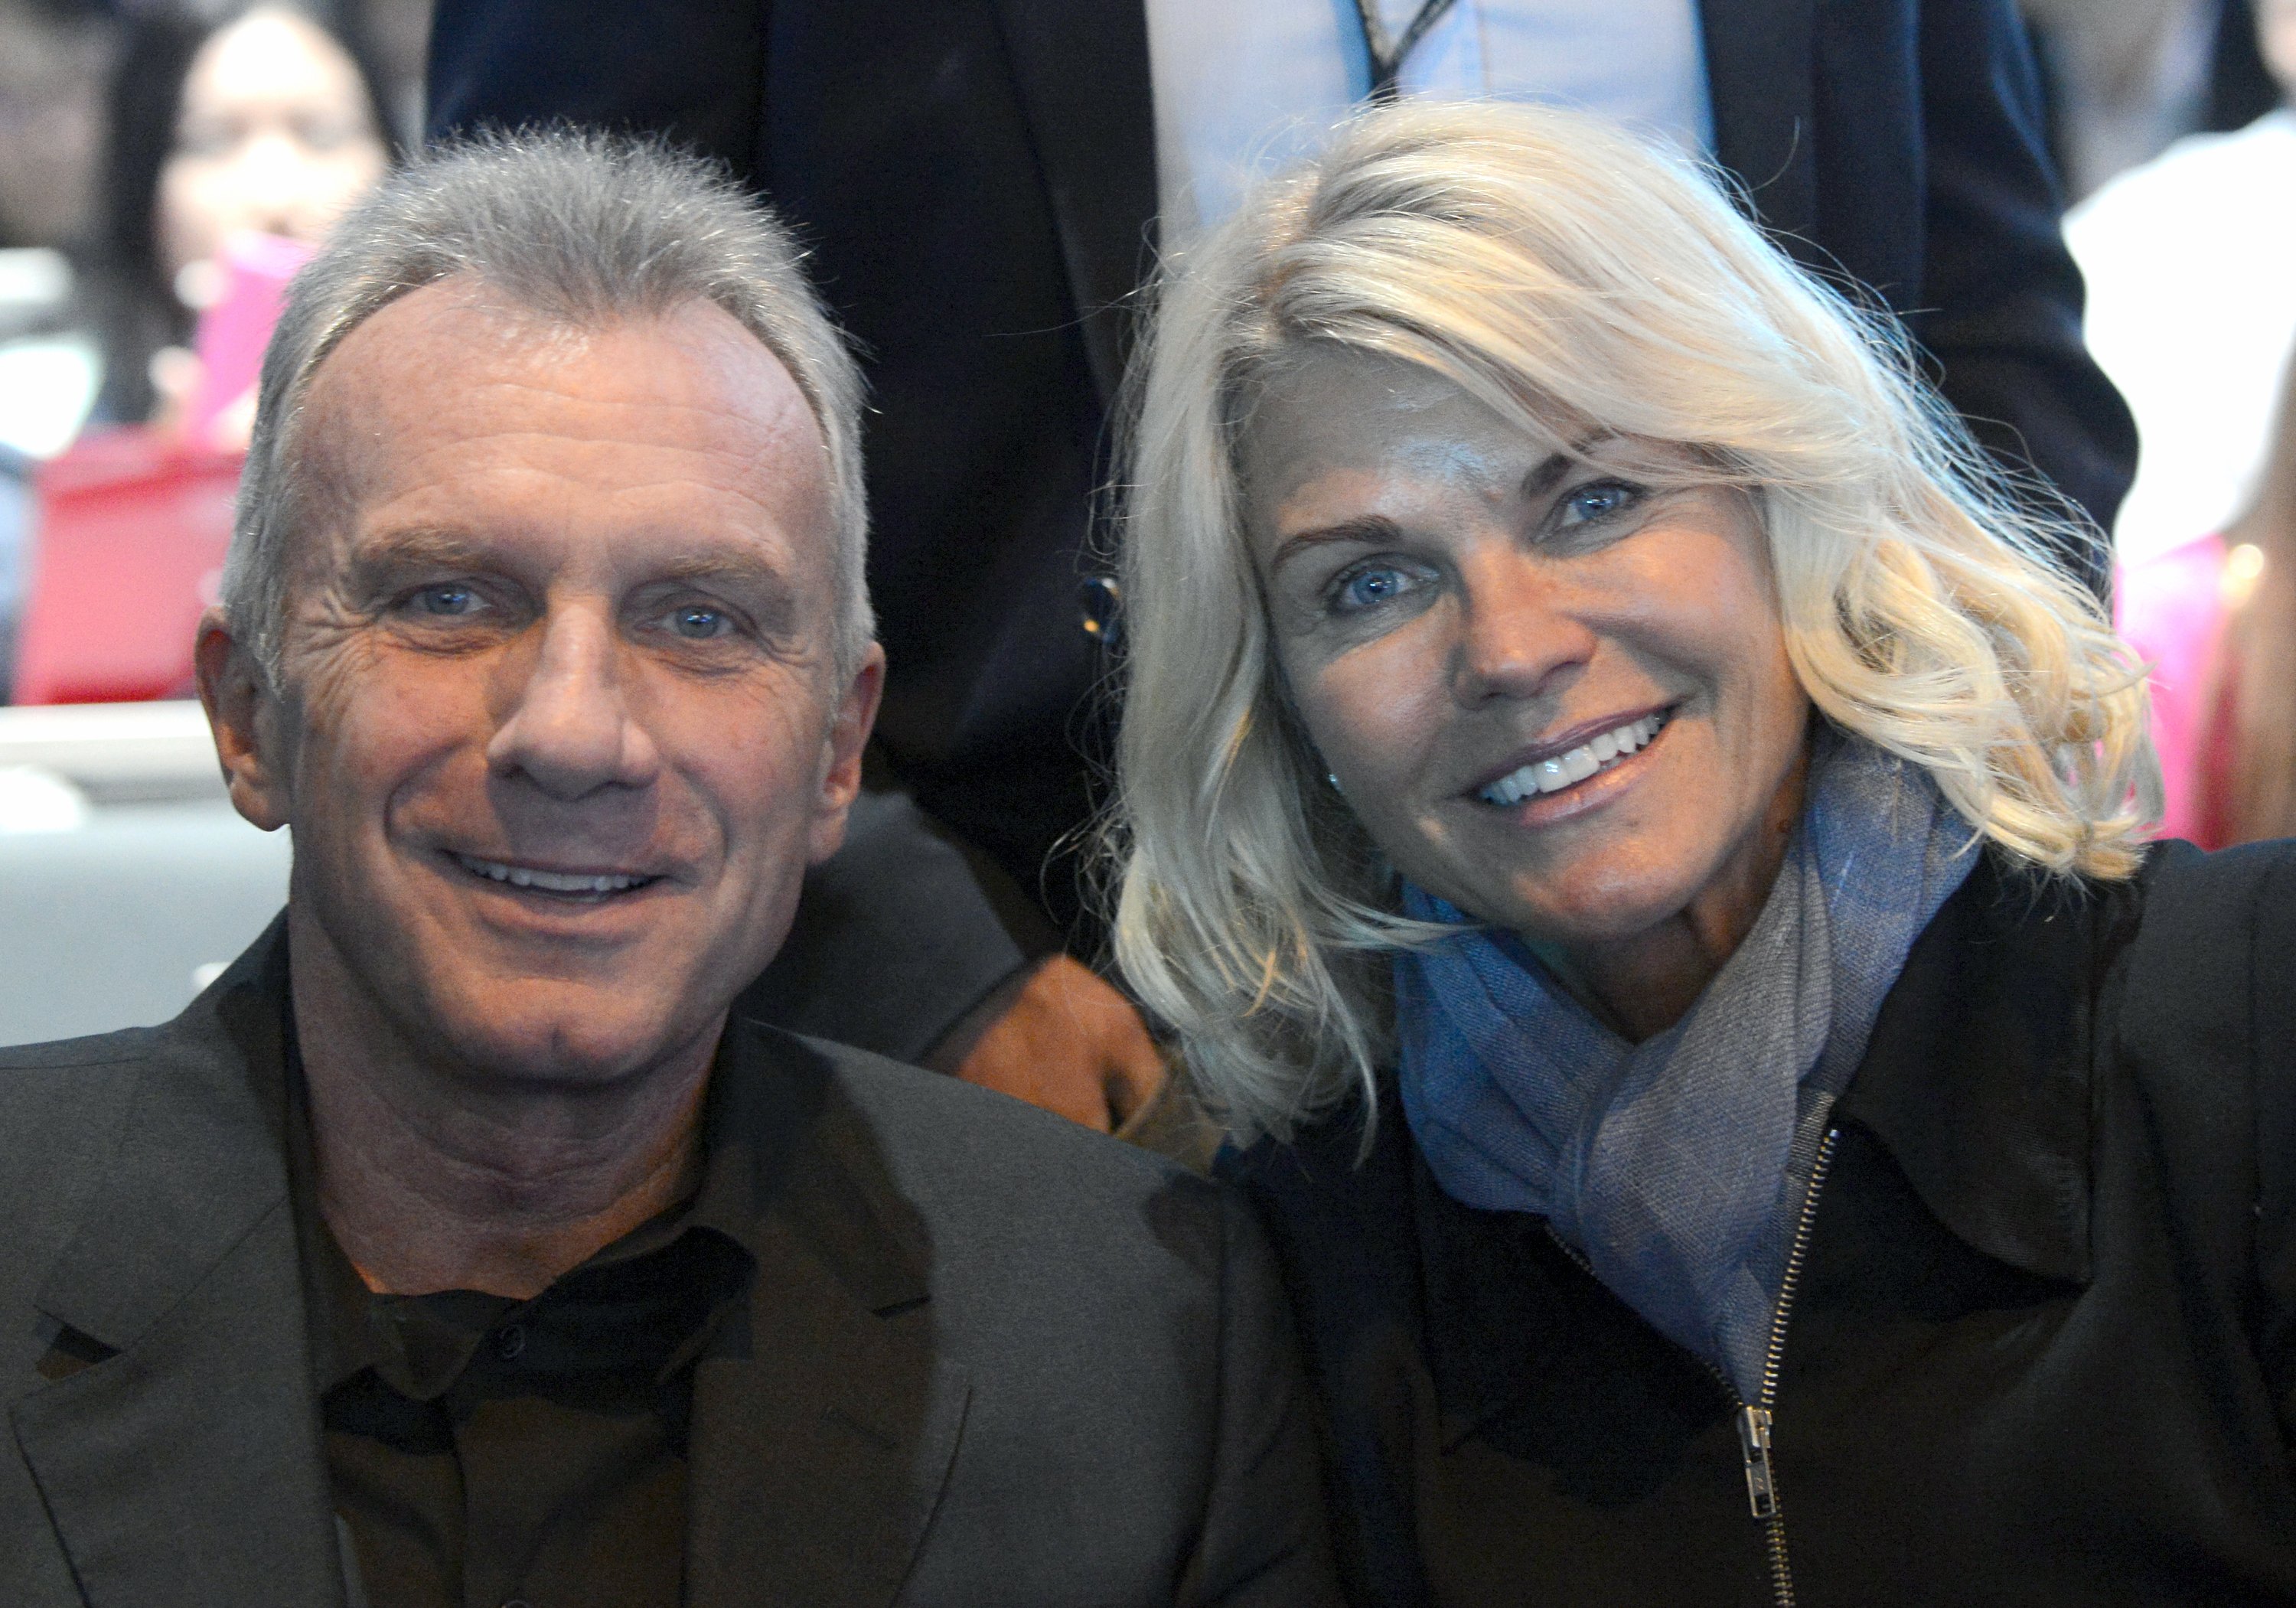 Joe and Jennifer Montana attend the Salesforce keynote during Dreamforce 2015 in San Francisco | Source: Getty Images